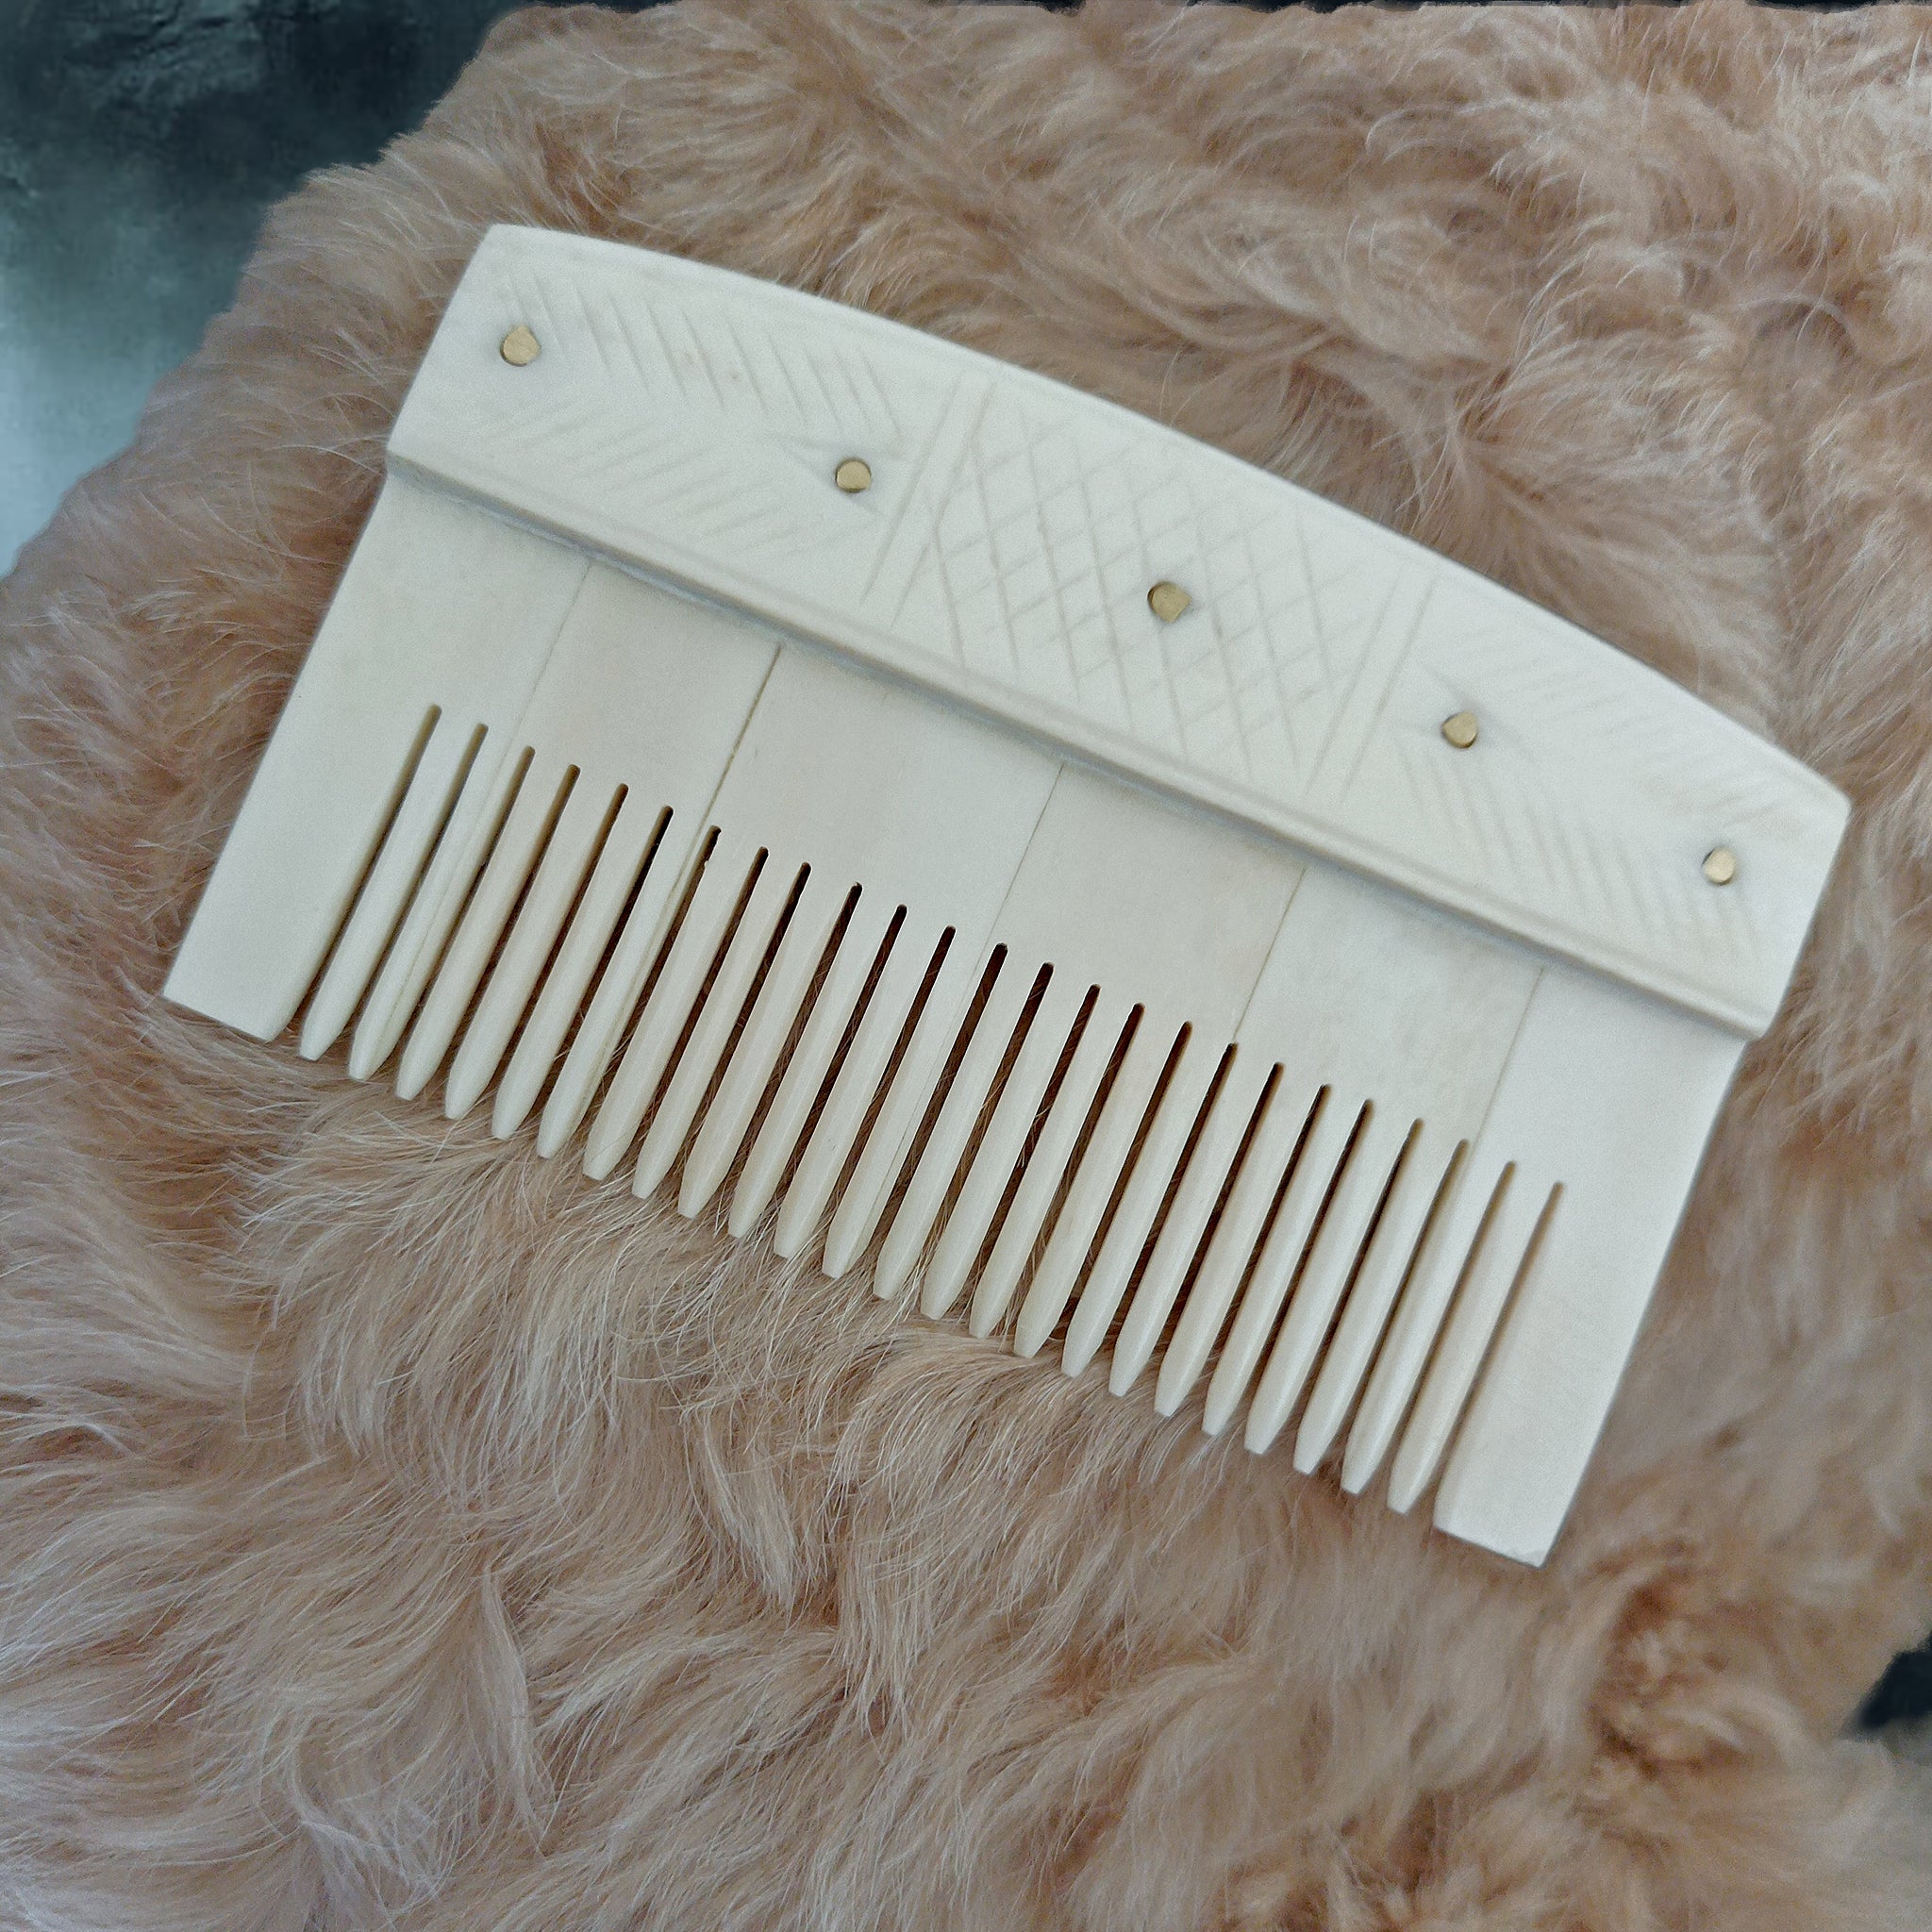 Decorated Bone Viking Comb with Rivets on Teddy